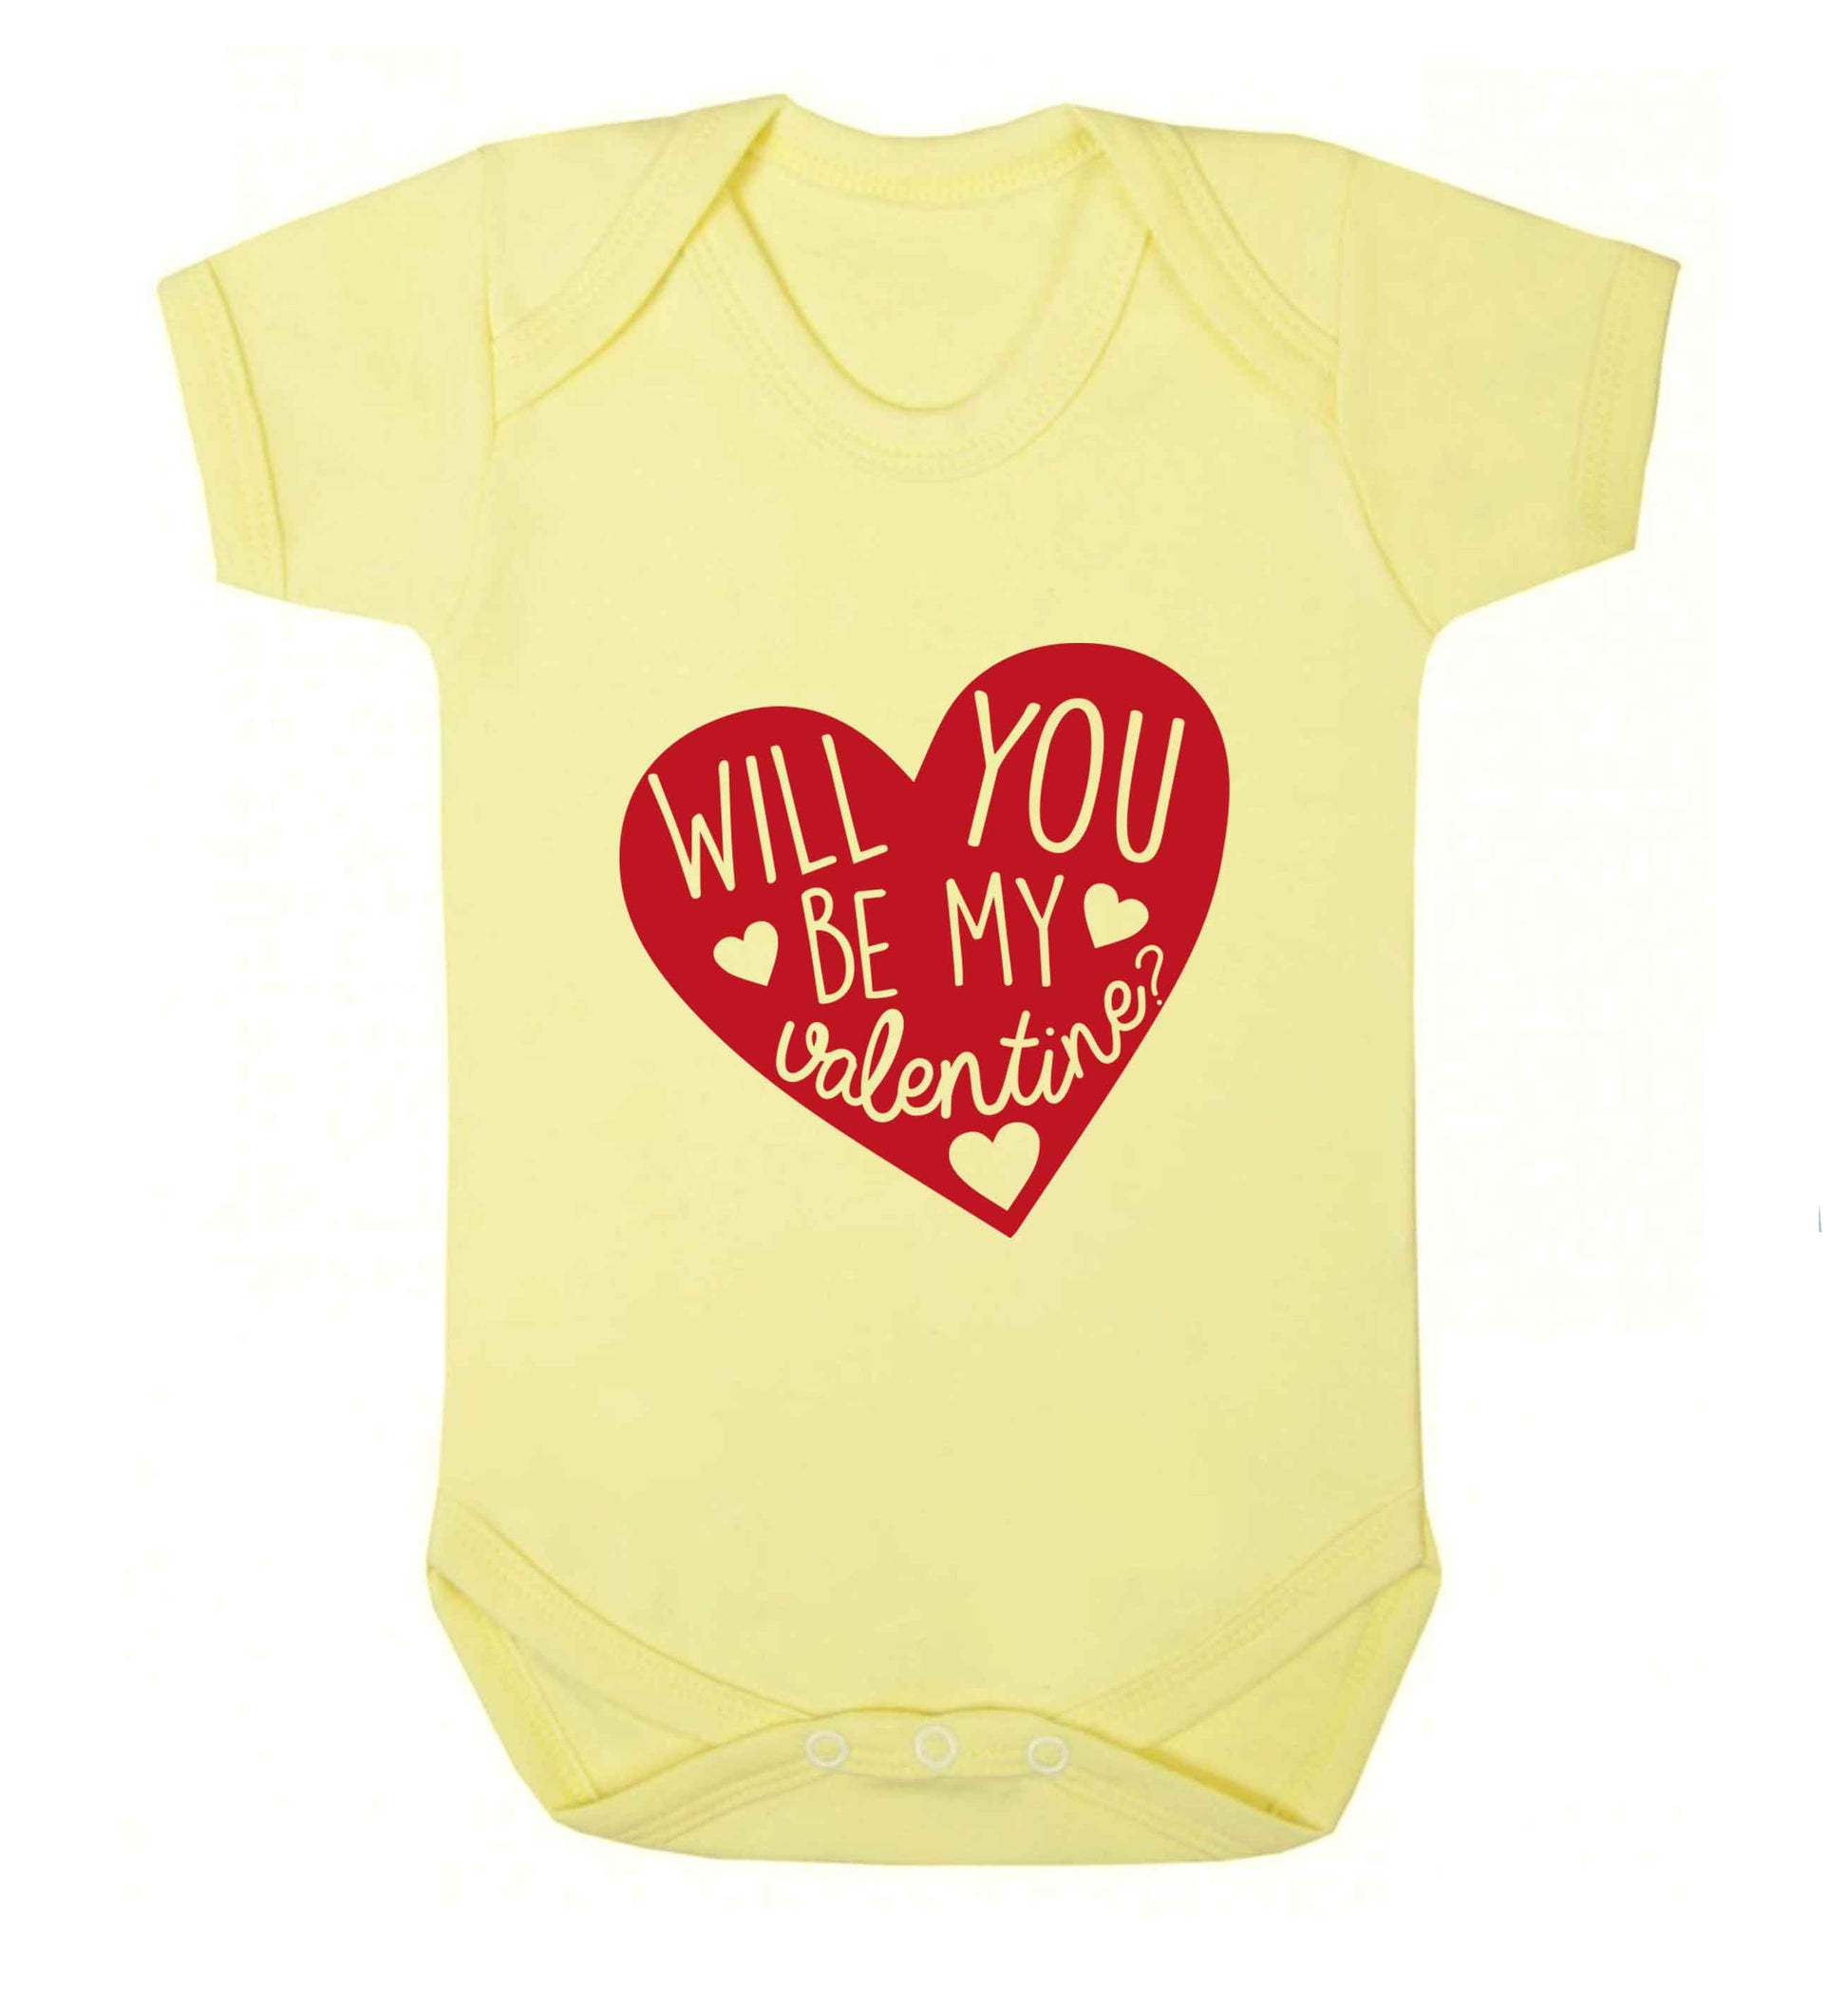 Will you be my valentine? baby vest pale yellow 18-24 months